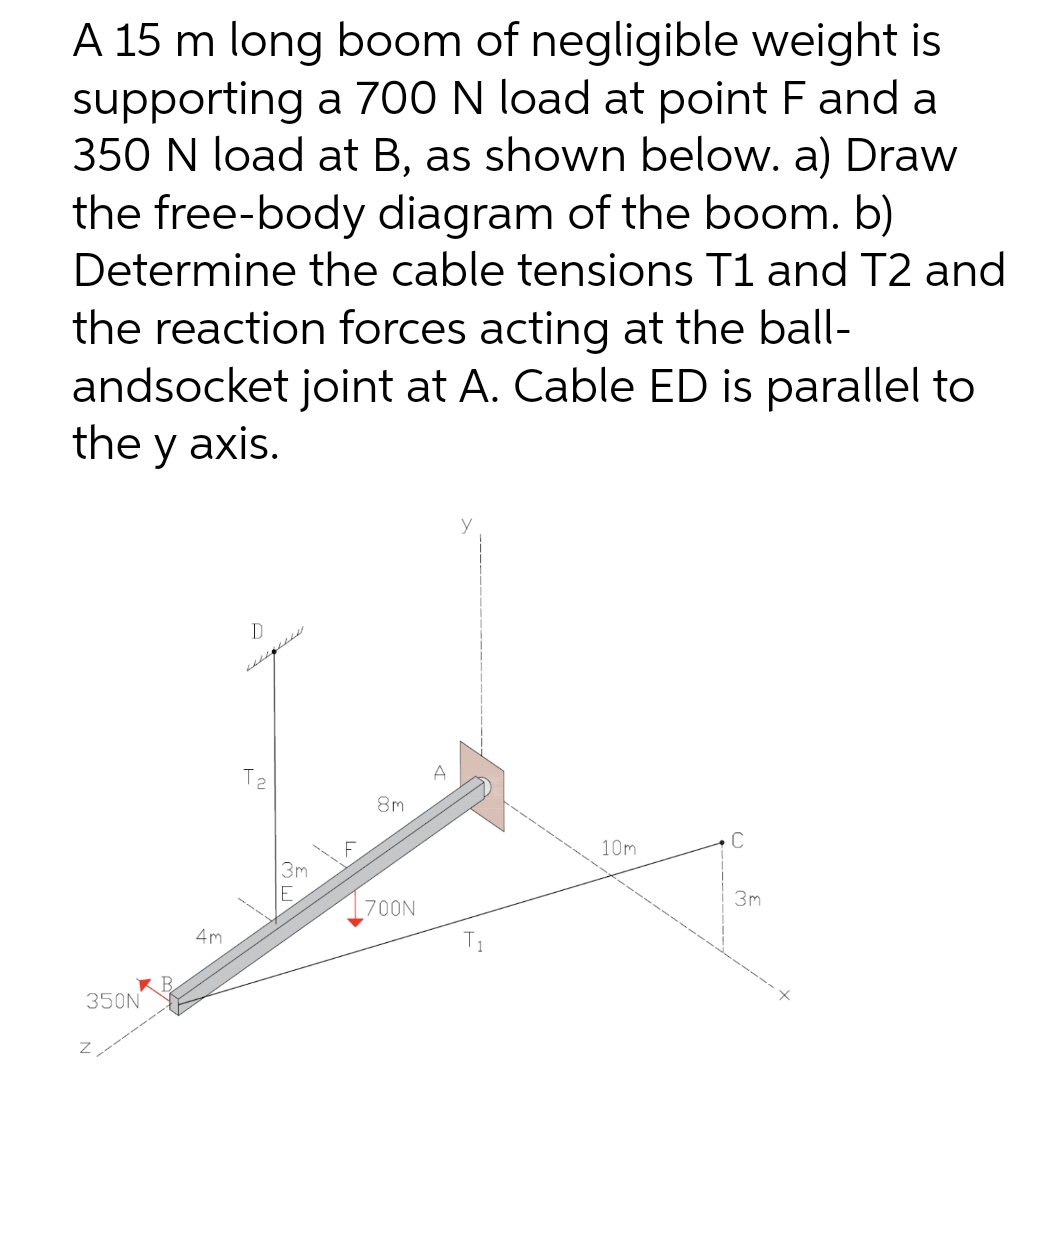 A 15 m long boom of negligible weight is
supporting a 700 N load at point F and a
350 N load at B, as shown below. a) Draw
the free-body diagram of the boom. b)
Determine the cable tensions T1 and T2 and
the reaction forces acting at the ball-
andsocket joint at A. Cable ED is parallel to
the y axis.
D
10m
C
350N
Z
4m
T₂
3m
E
8m
700N
3m